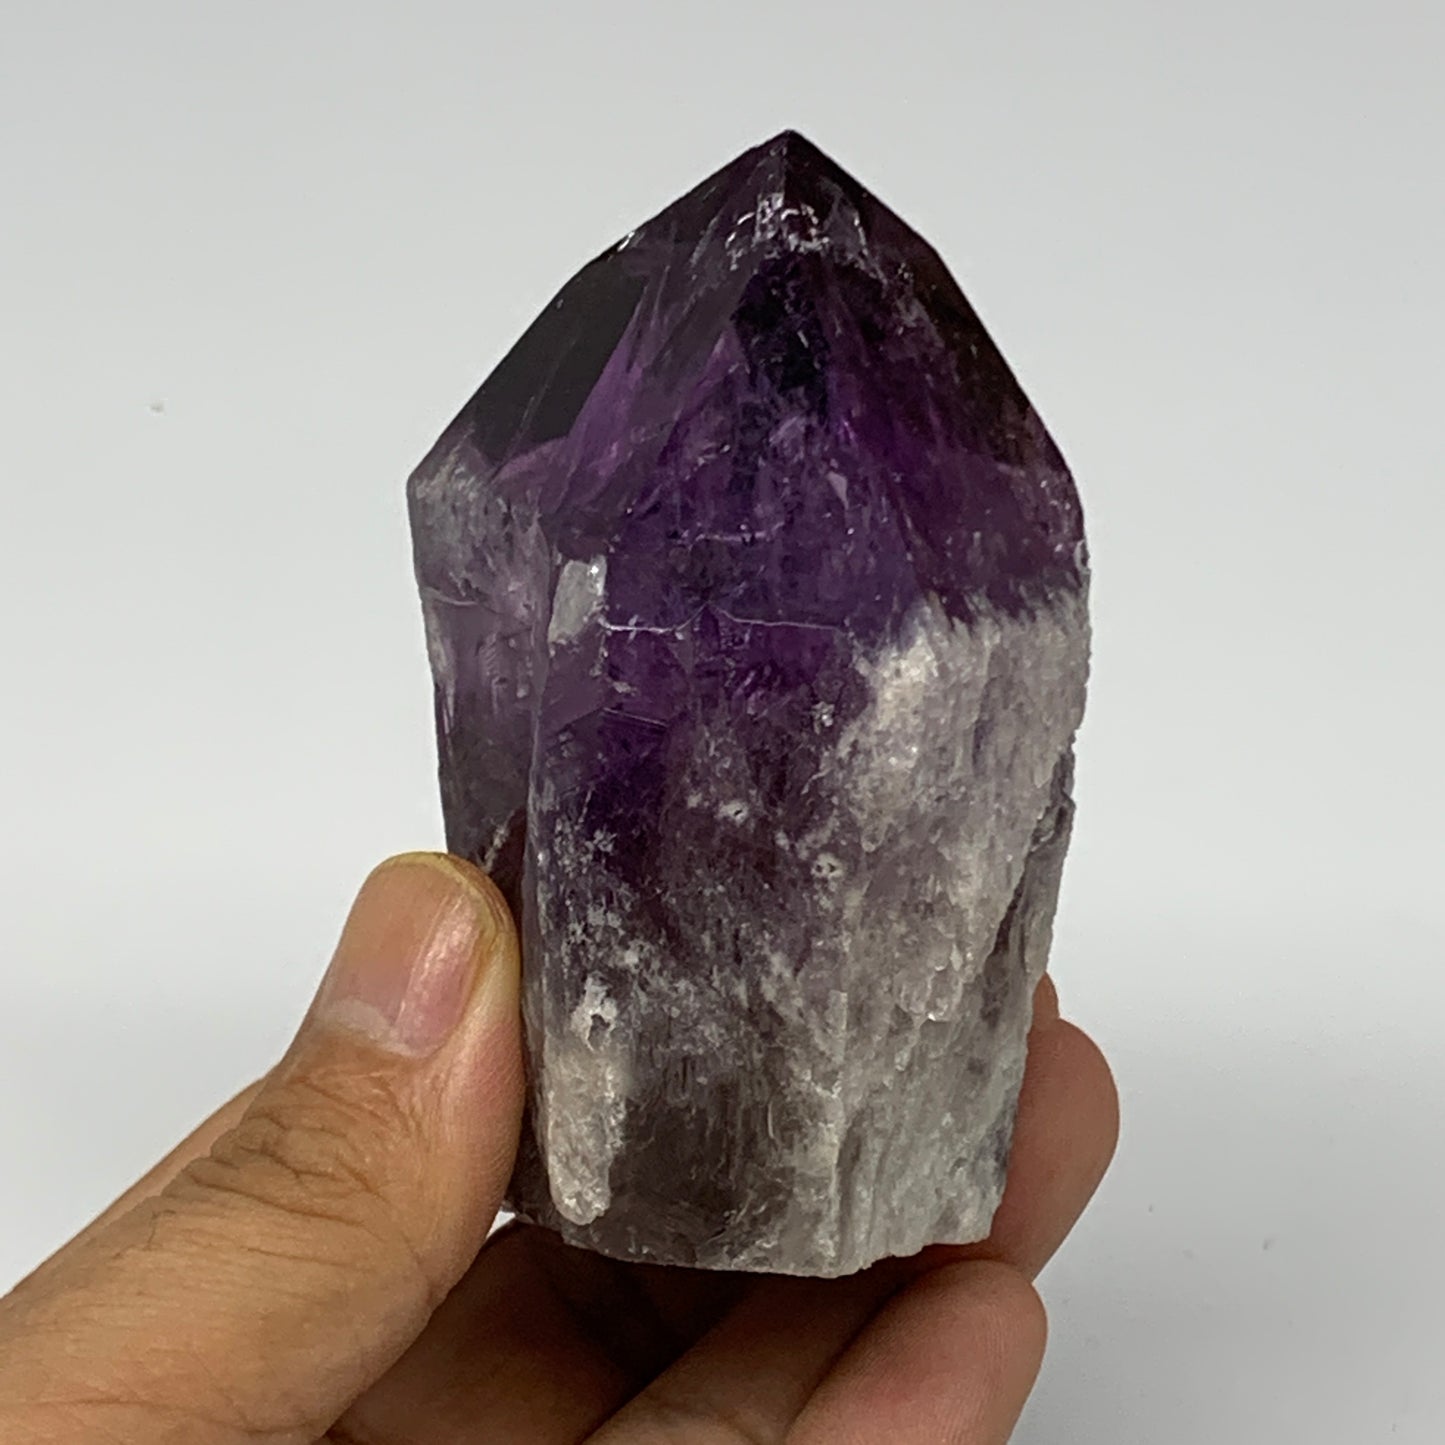 240.3g,3.1"x2.1"x1.7", Amethyst Point Polished Rough lower part Stands, B19057